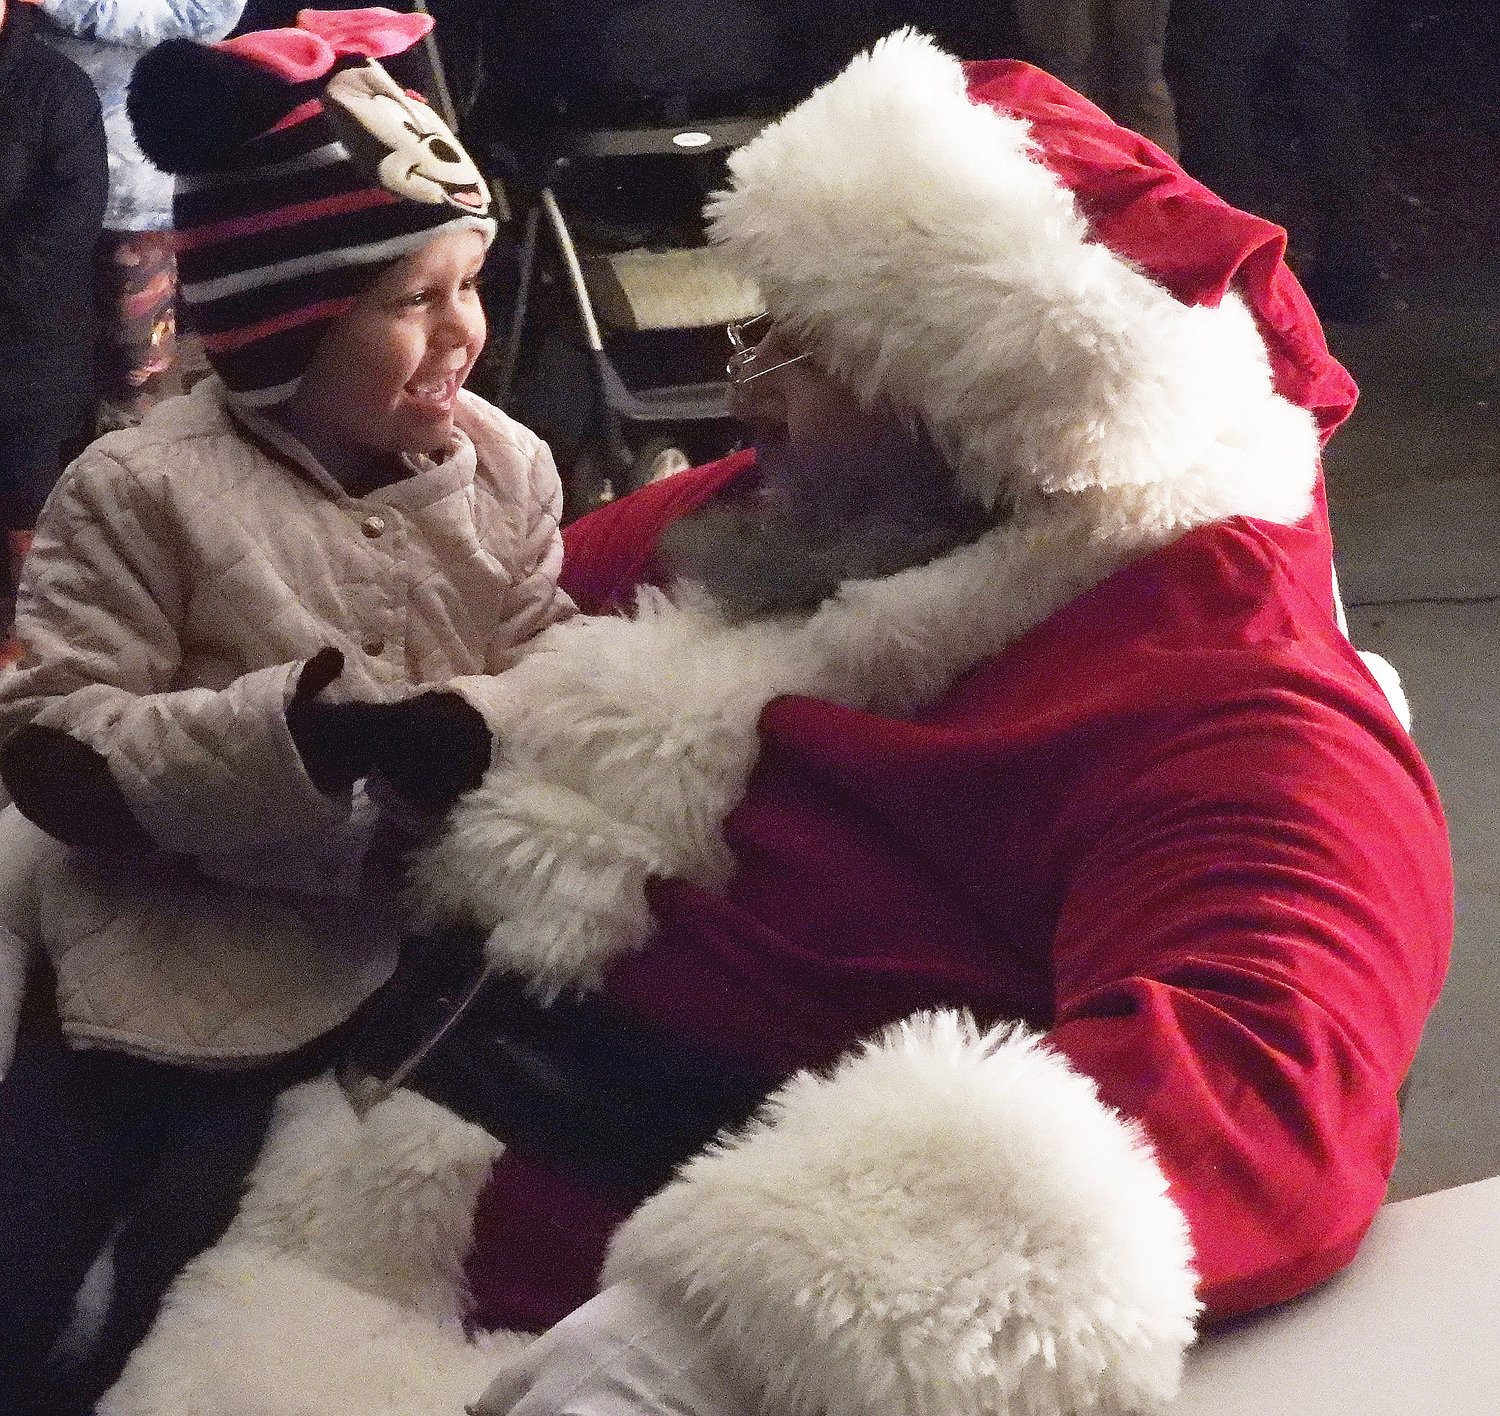 CHRISTMAS MAGIC — A little girl laughs excitedly as she comes face to face with Santa Claus at Higinbotham Park on Friday, Dec. 3 during the city of Oneida's annual tree lighting ceremony. For more photos of the Oneida Christmas Festival, visit the Rome Sentinel website.